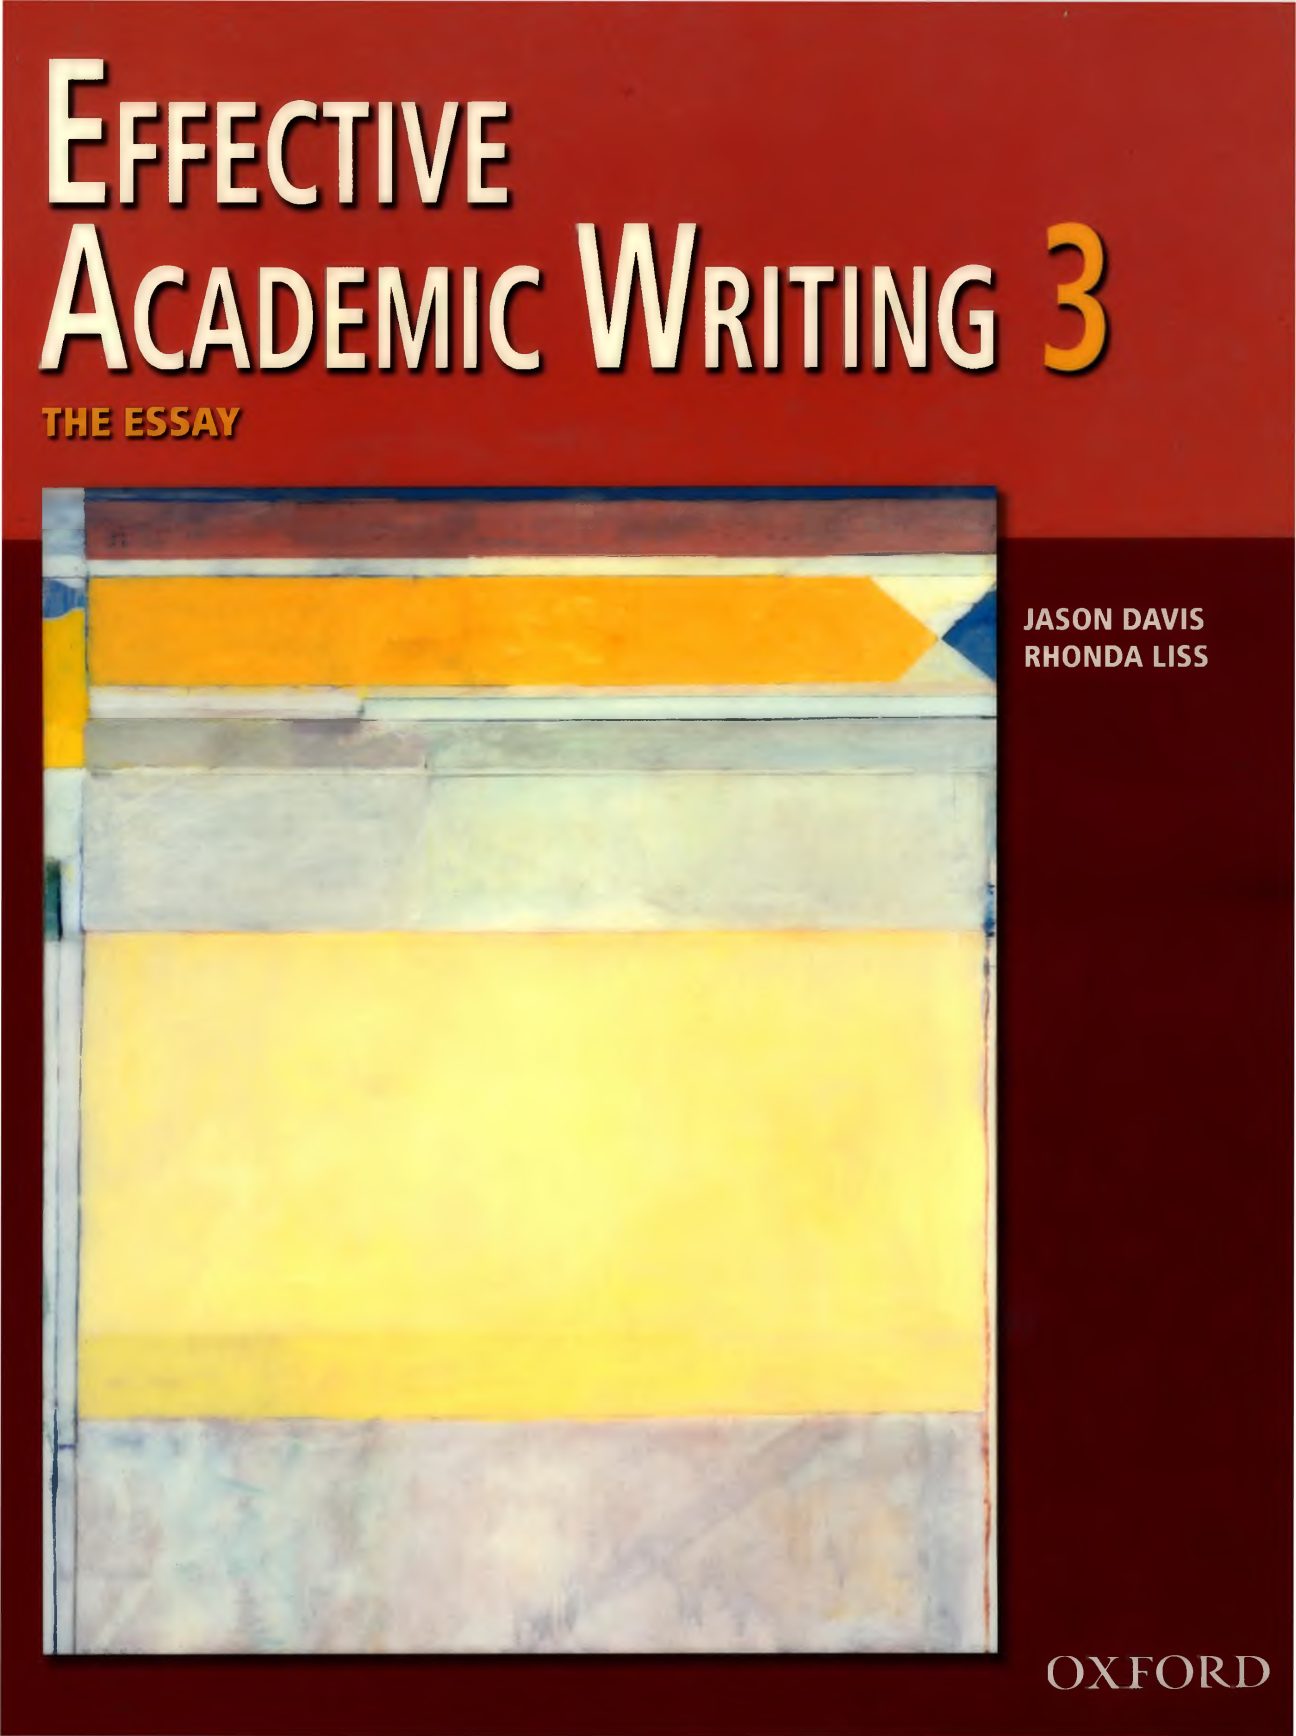 Rich Results on Google's SERP when searching for 'Effective Academic Writing 3'